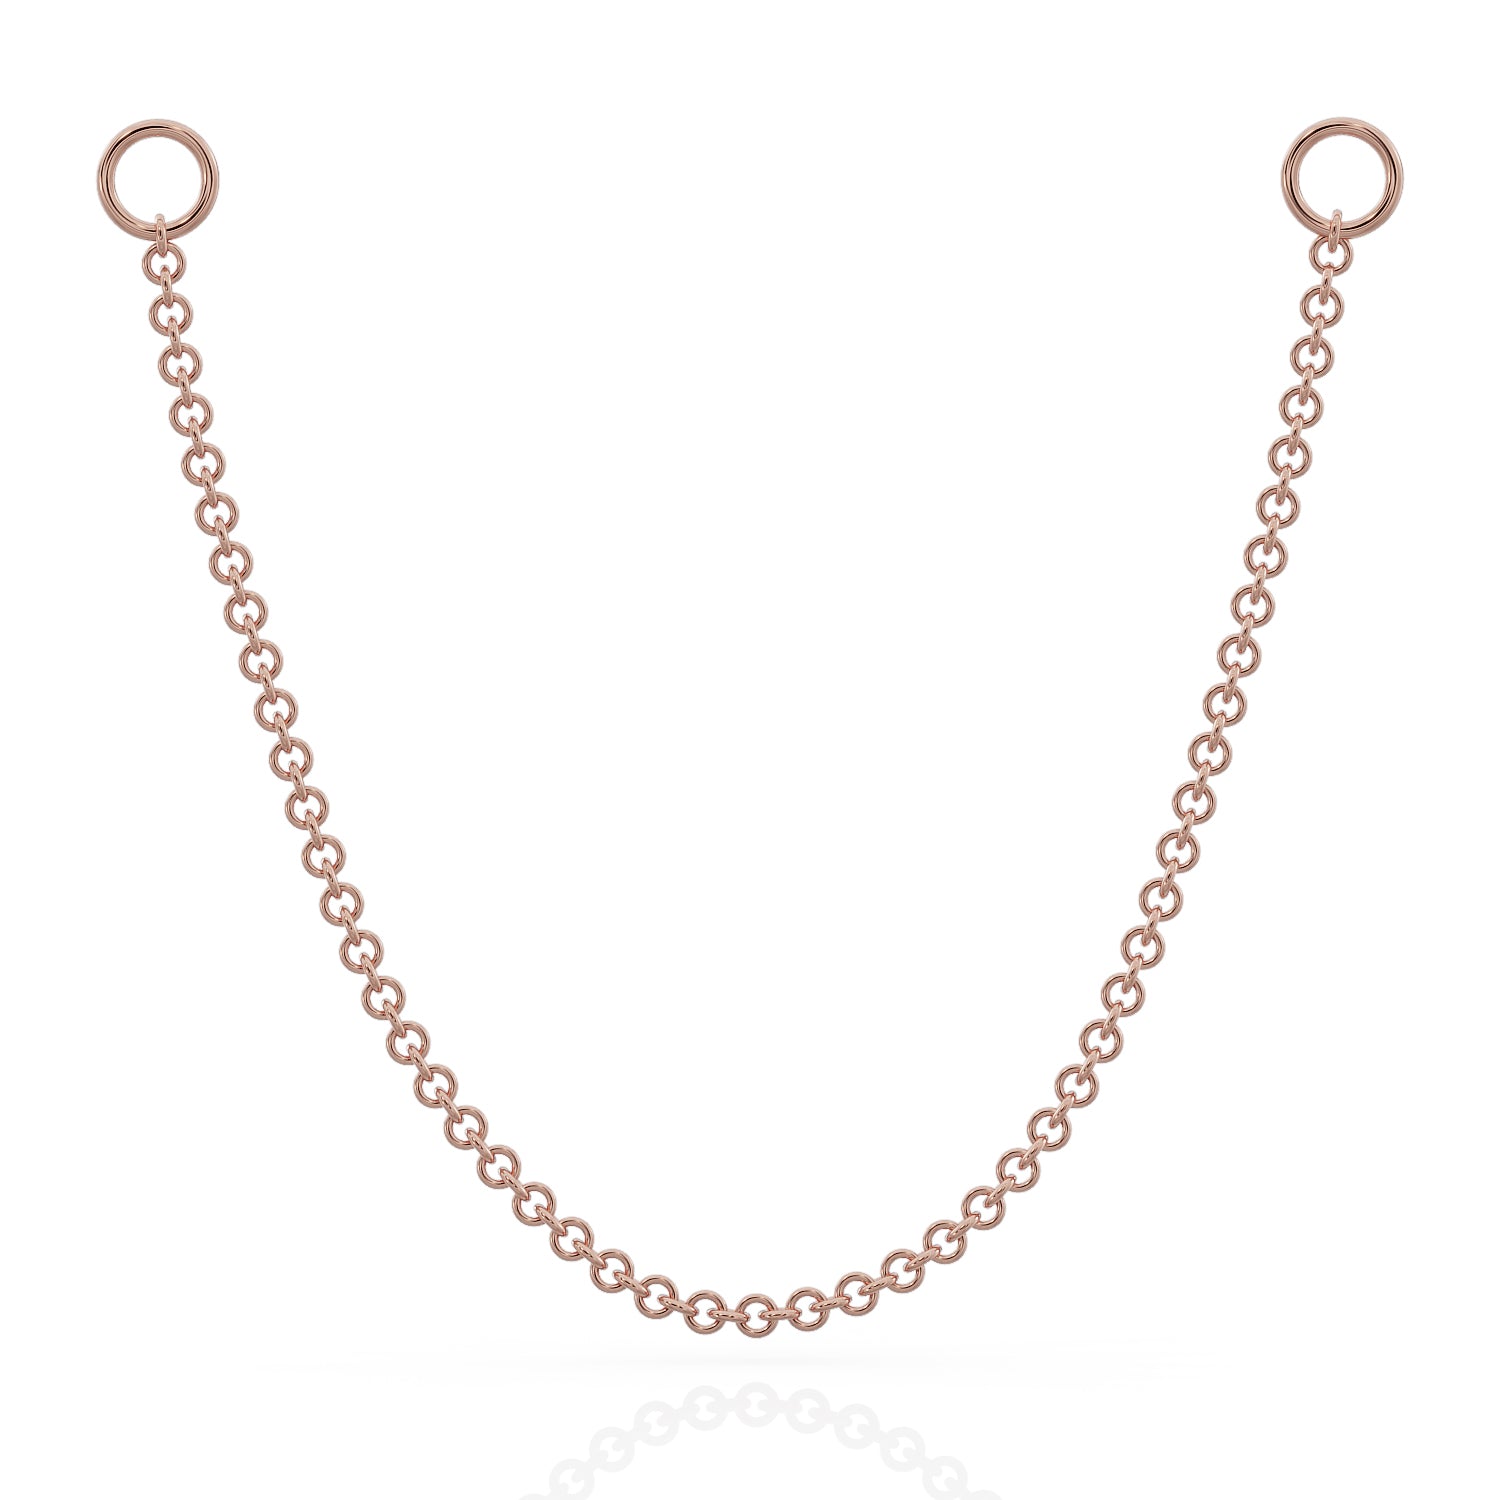 Link Chain Piercing Jewelry Add-on Accessory-Rose Gold   75mm